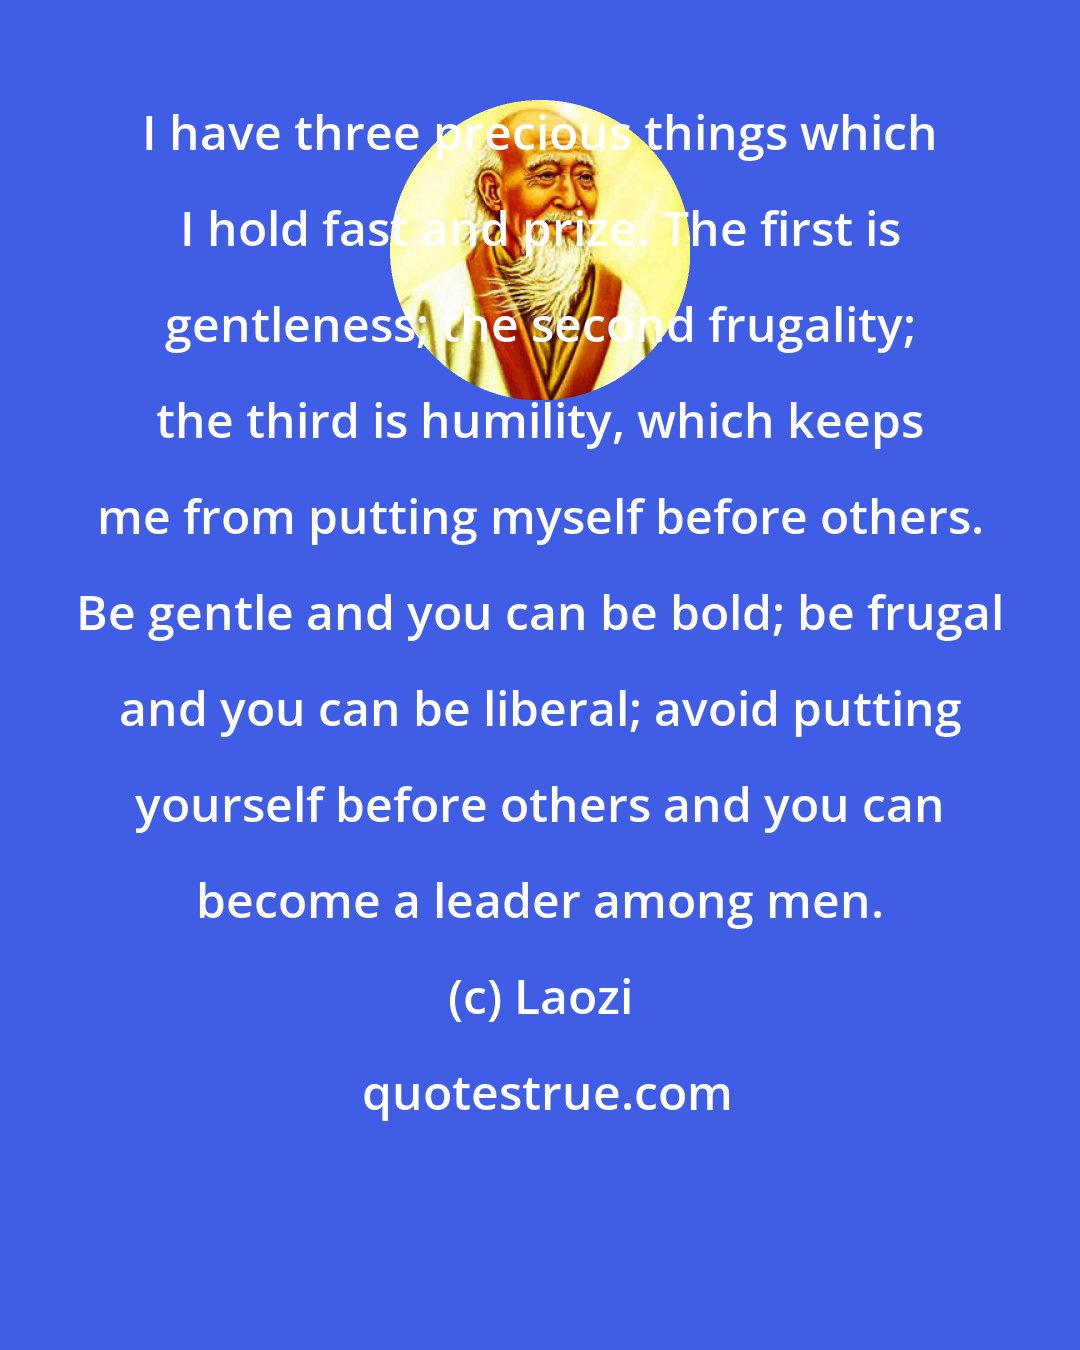 Laozi: I have three precious things which I hold fast and prize. The first is gentleness; the second frugality; the third is humility, which keeps me from putting myself before others. Be gentle and you can be bold; be frugal and you can be liberal; avoid putting yourself before others and you can become a leader among men.